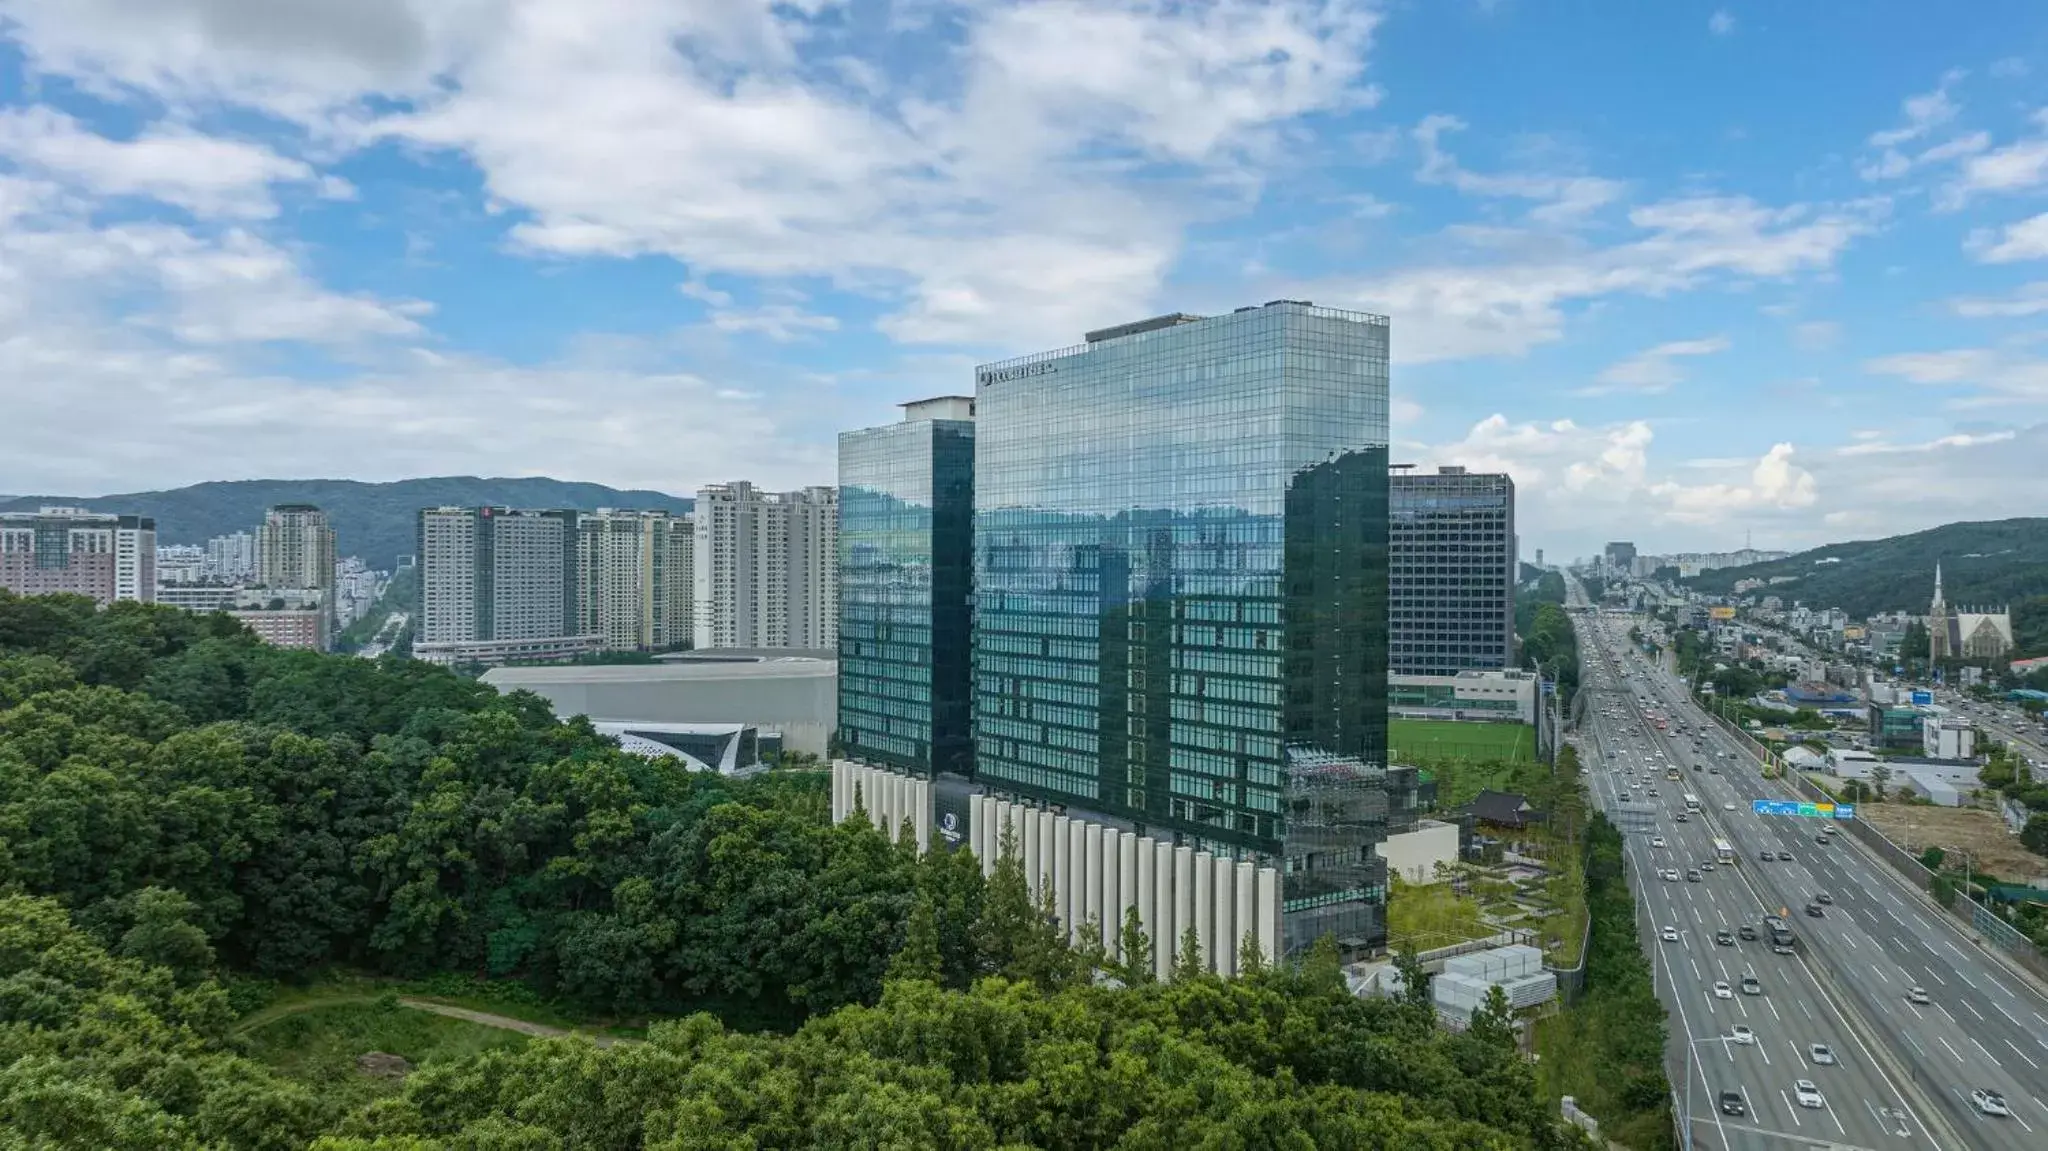 Property building in DoubleTree By Hilton Seoul Pangyo